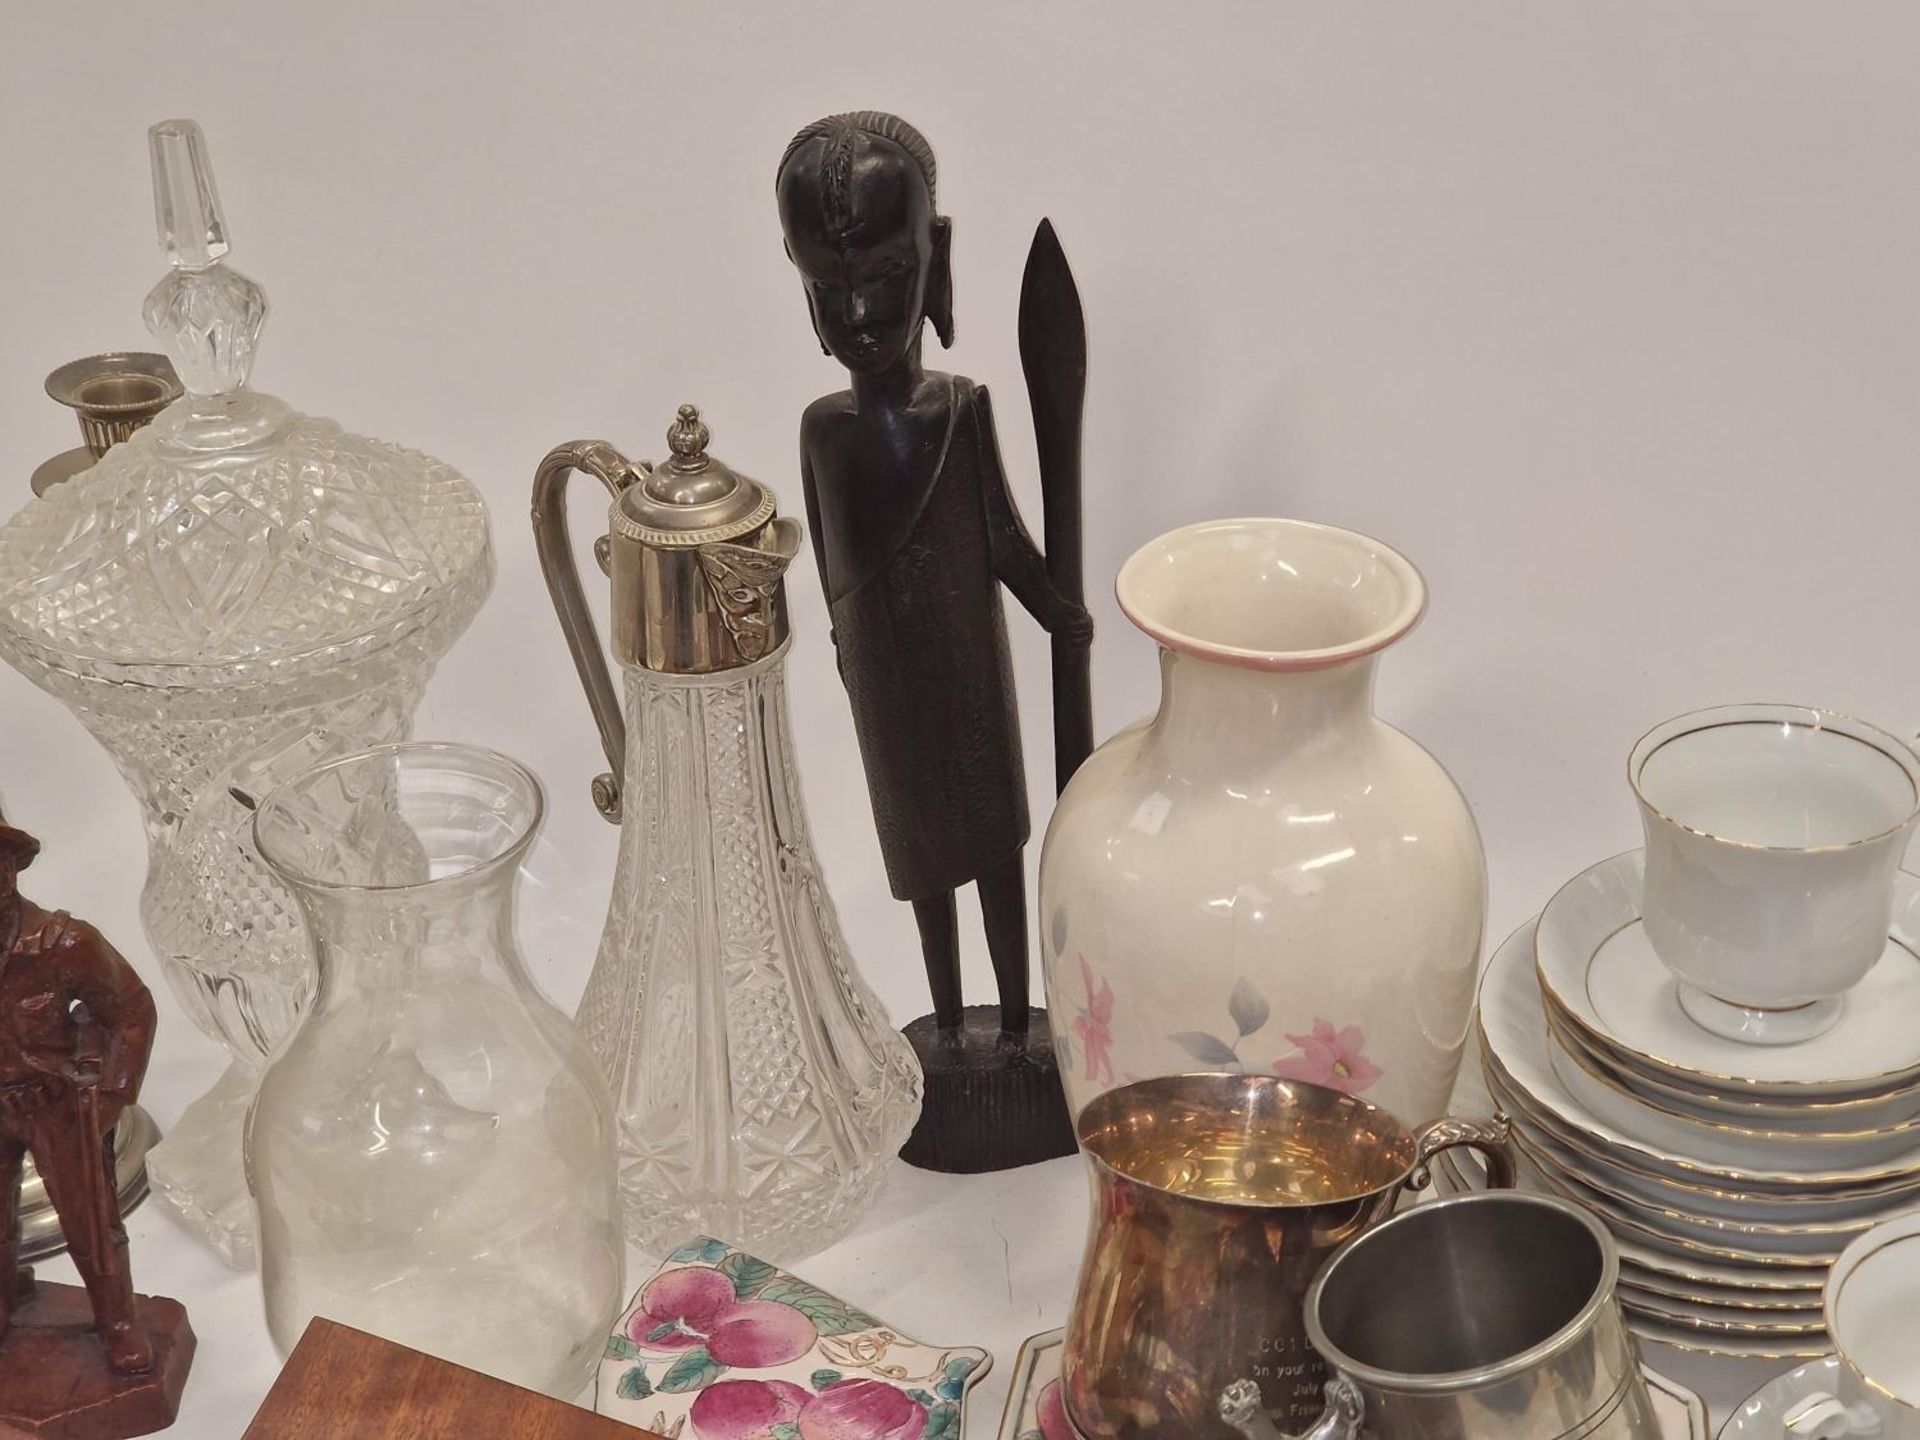 Miscellaneous items to include glassware, china, wooden items etc. - Image 2 of 3